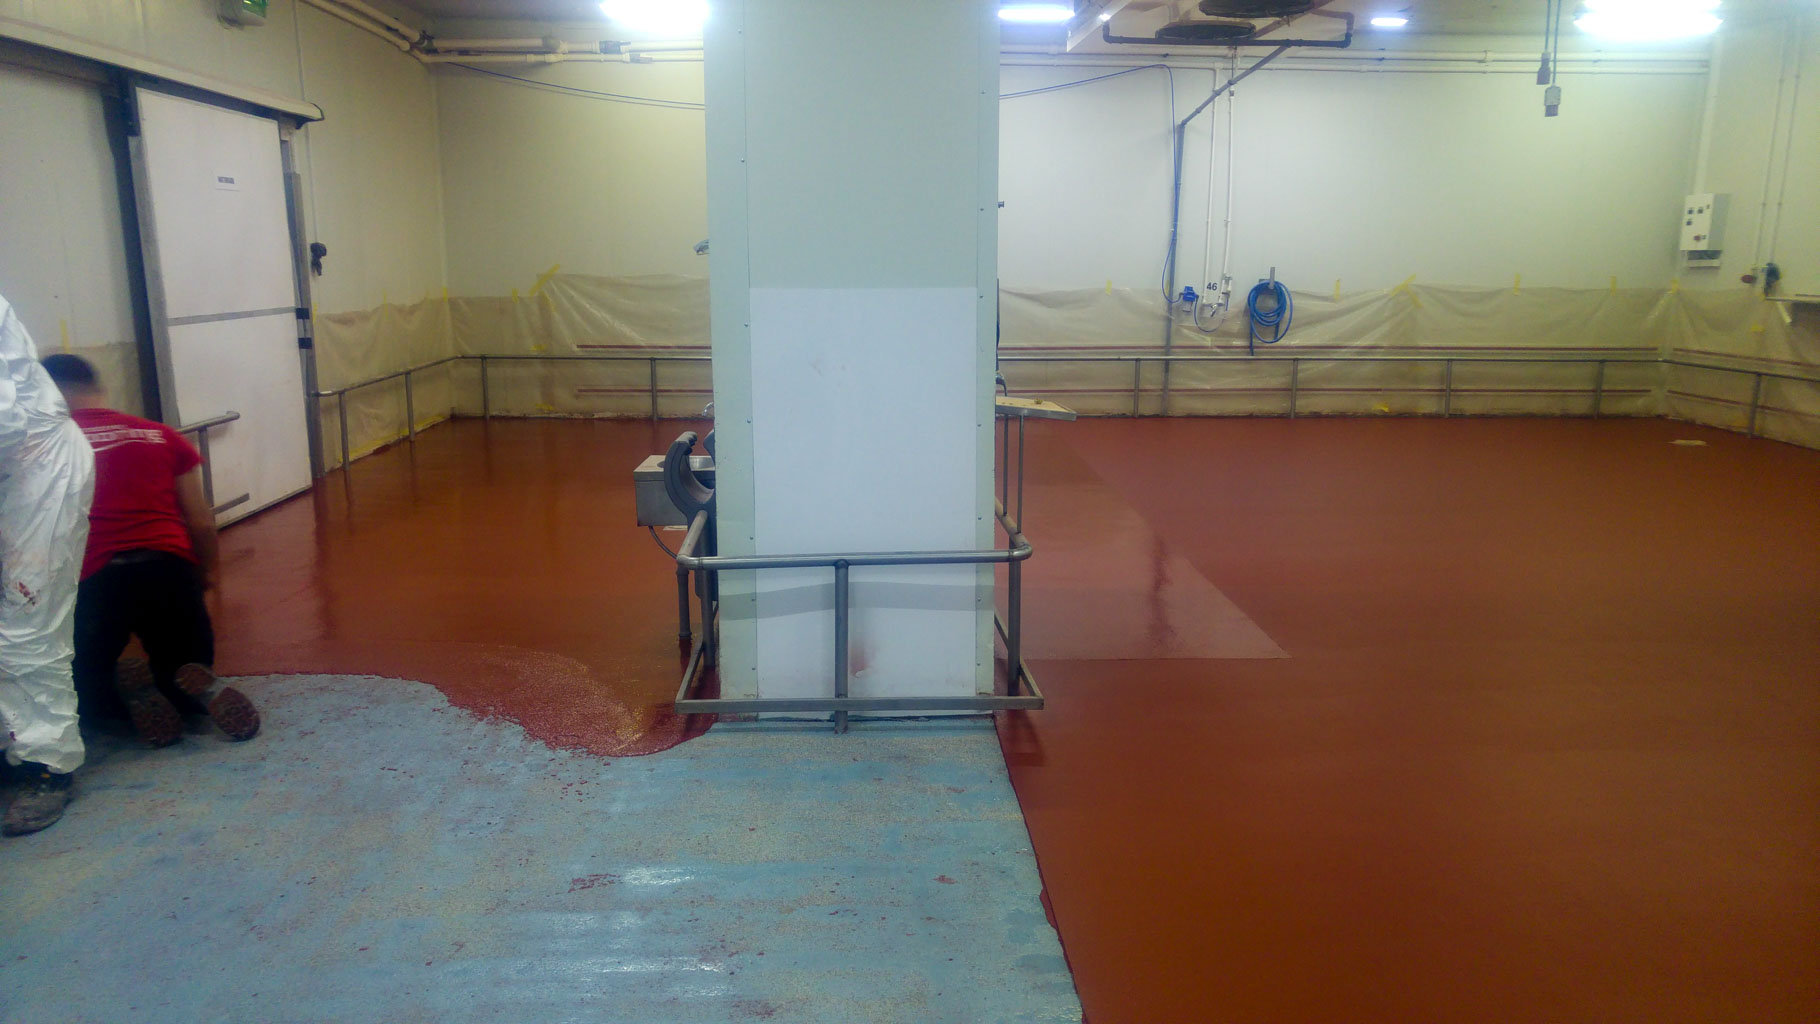 FOX - Resin Floors for Food and Beverage Production Facilities